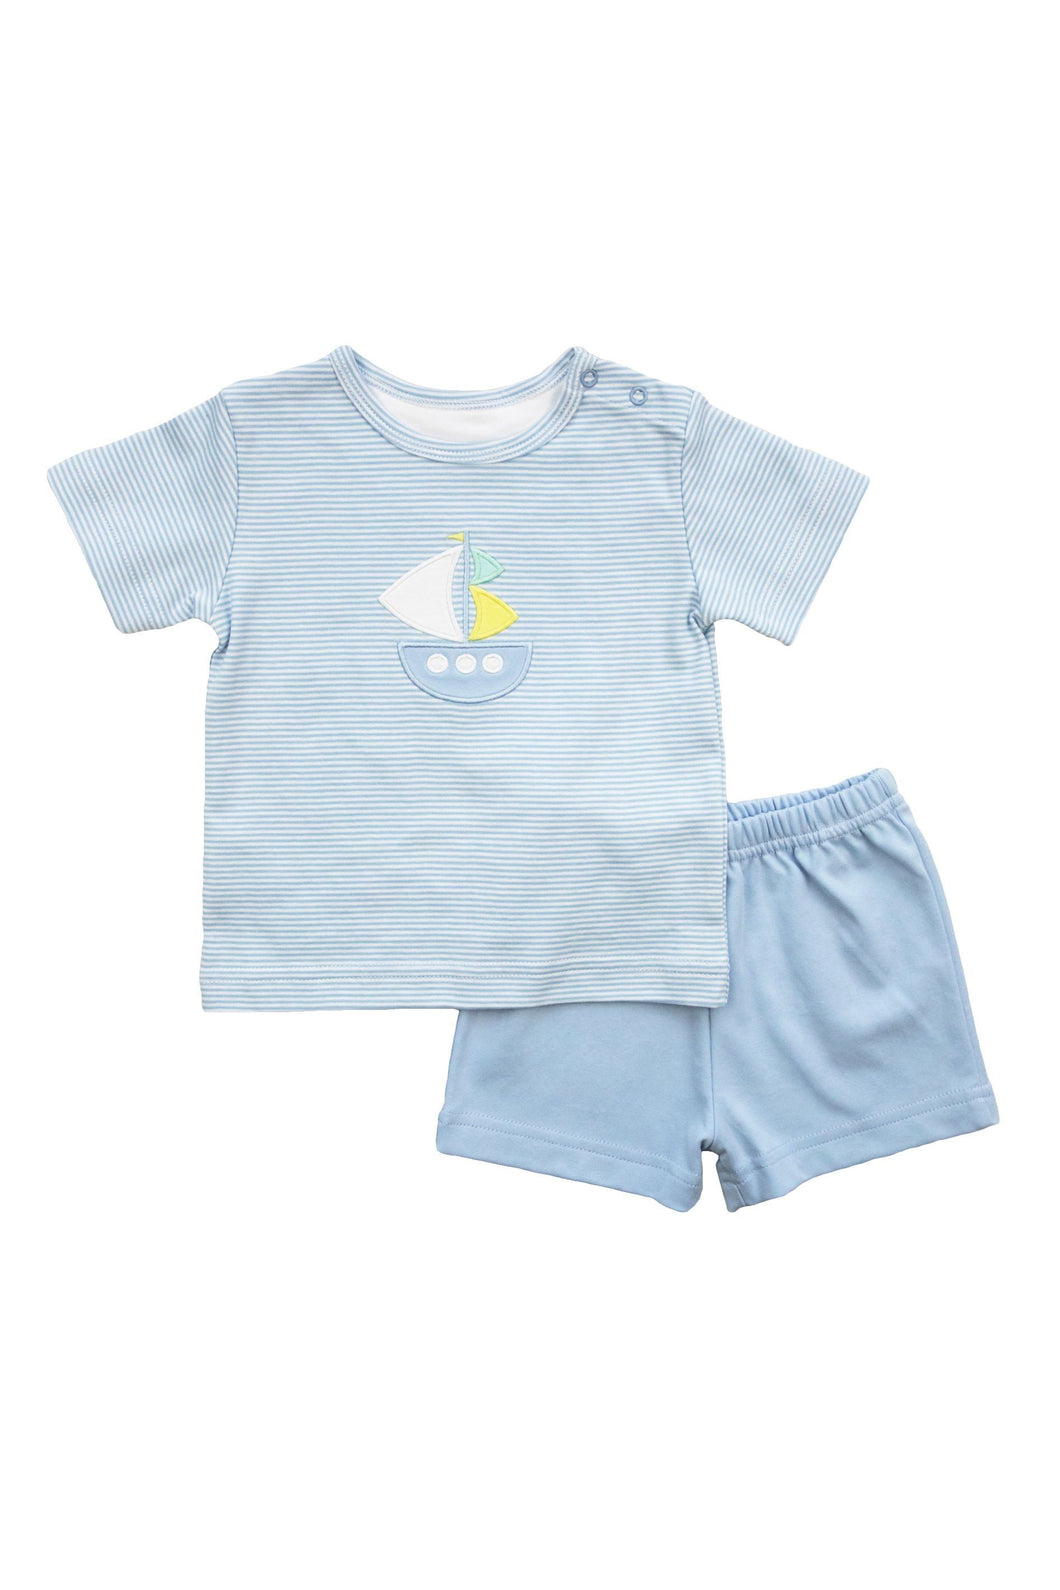 Blue Knit Short Set with Boat